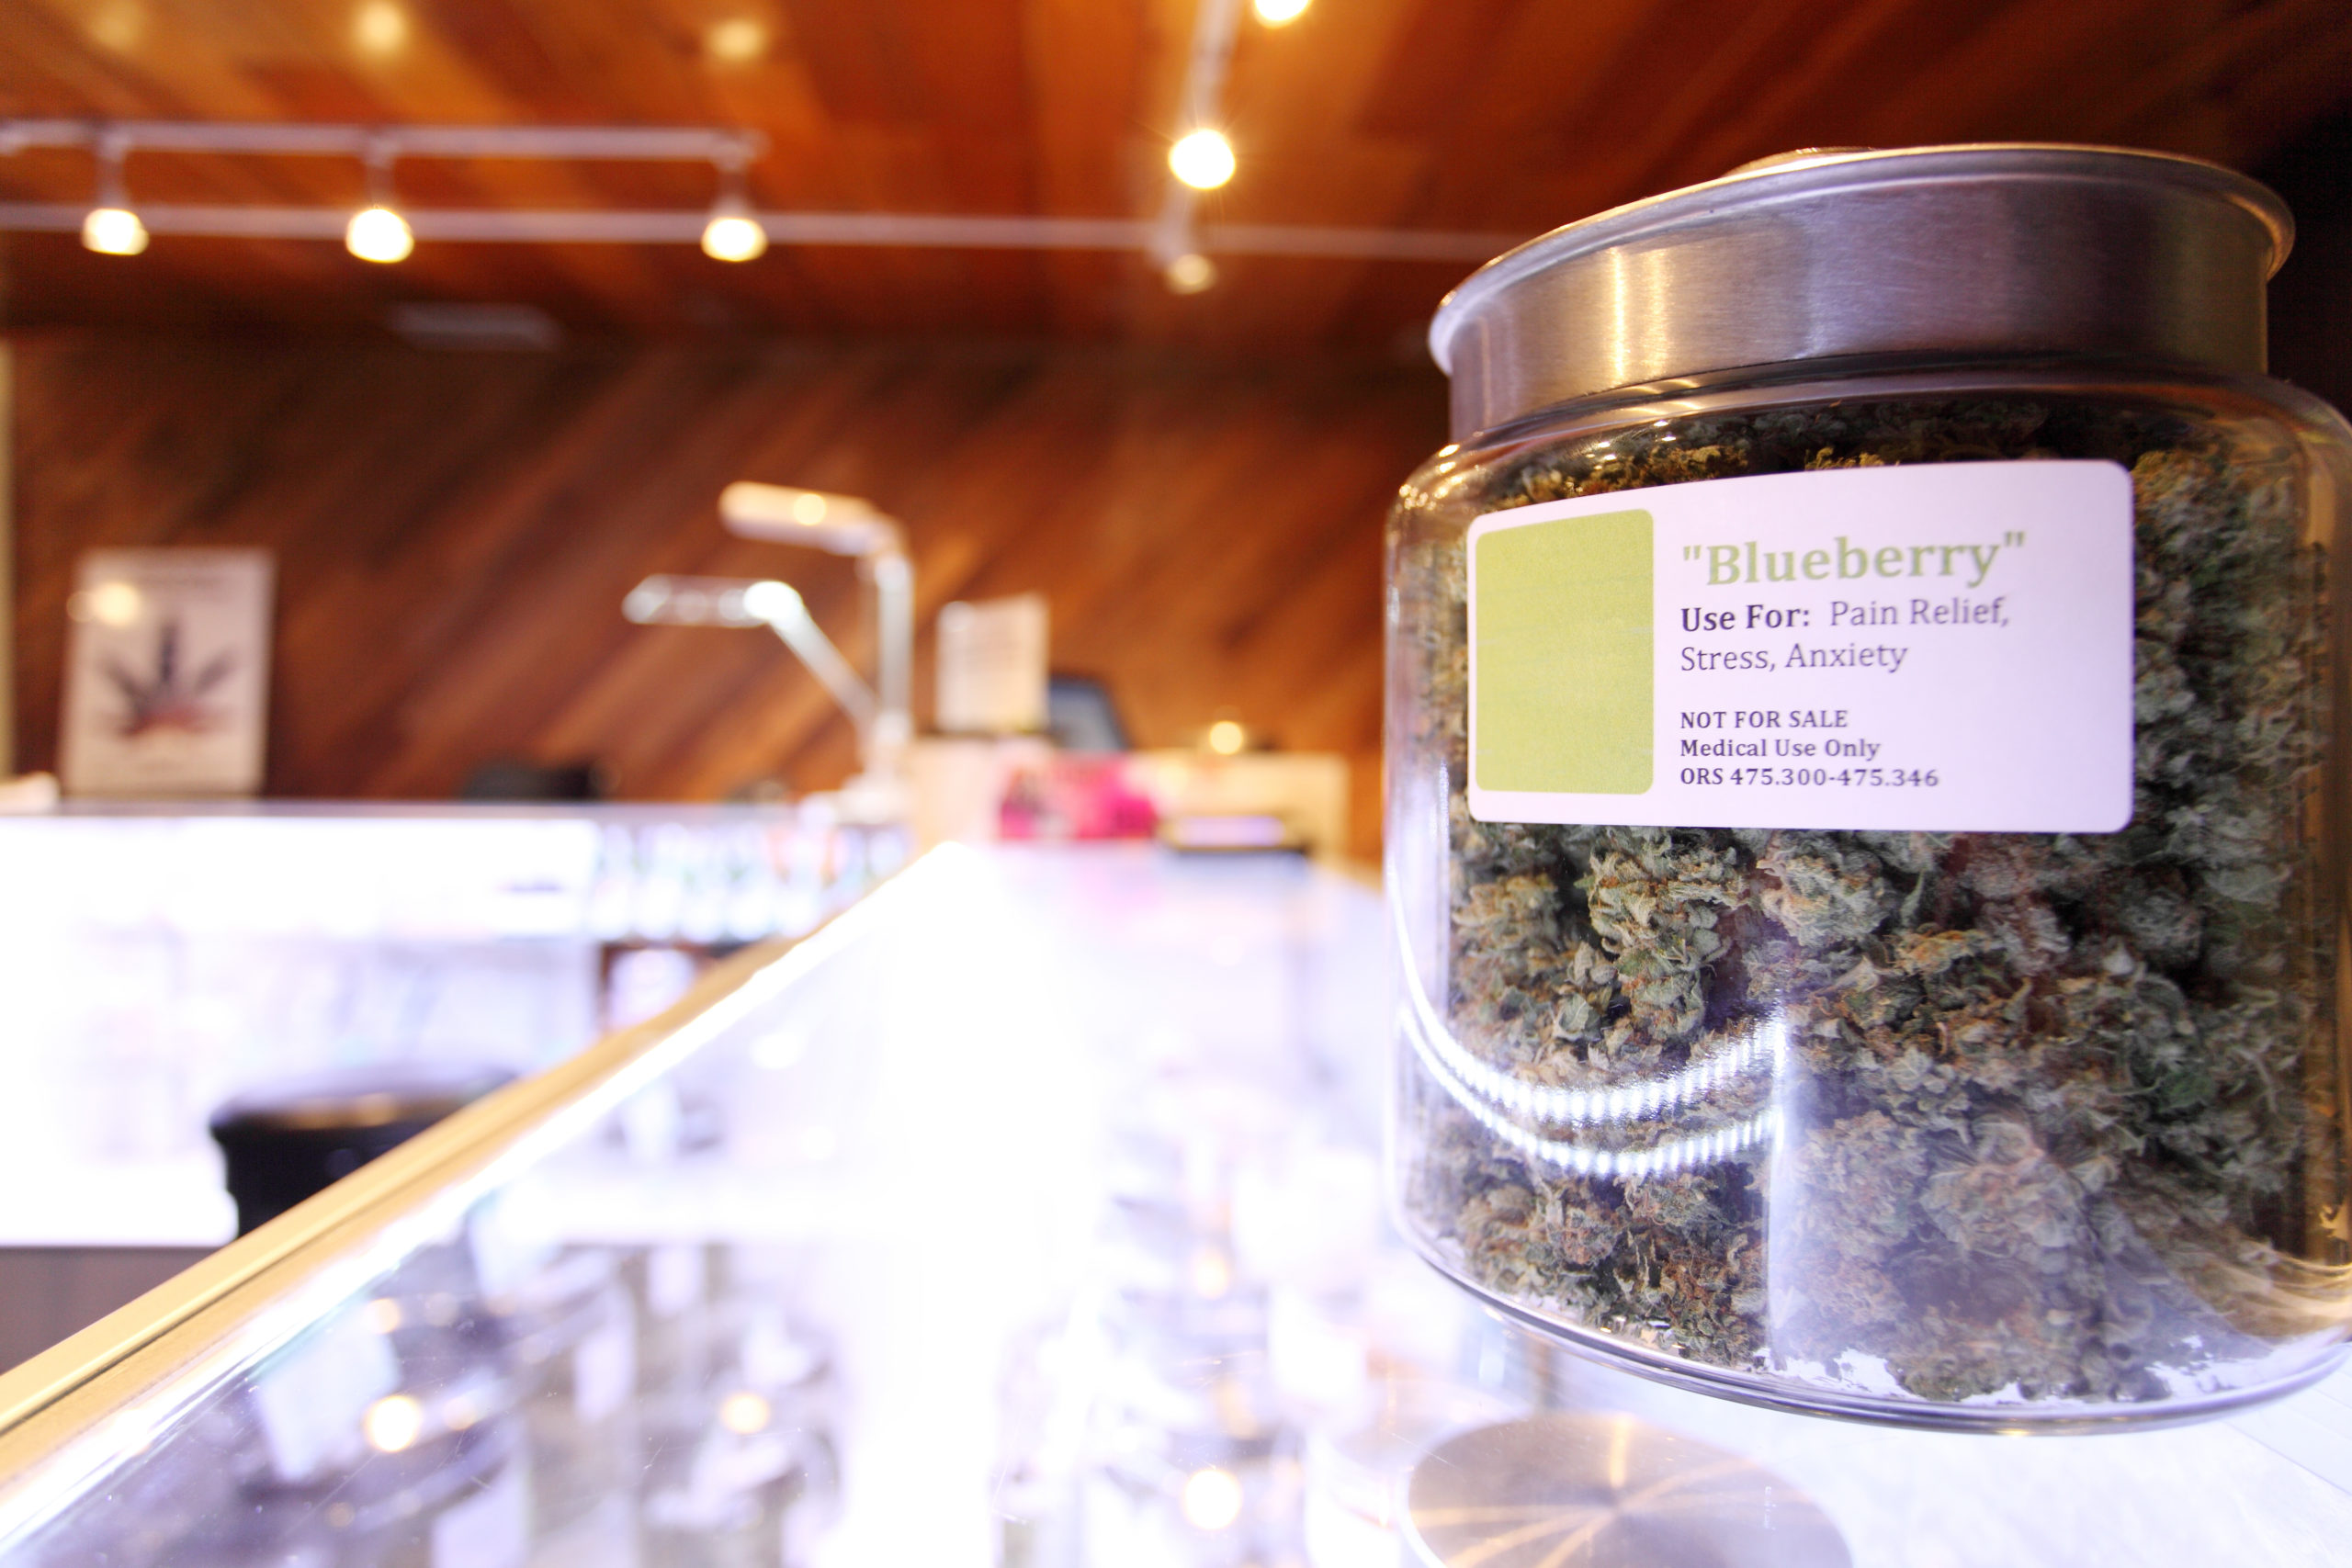 You are currently viewing Dispensaries Deemed Essential During California Stay at Home Order.